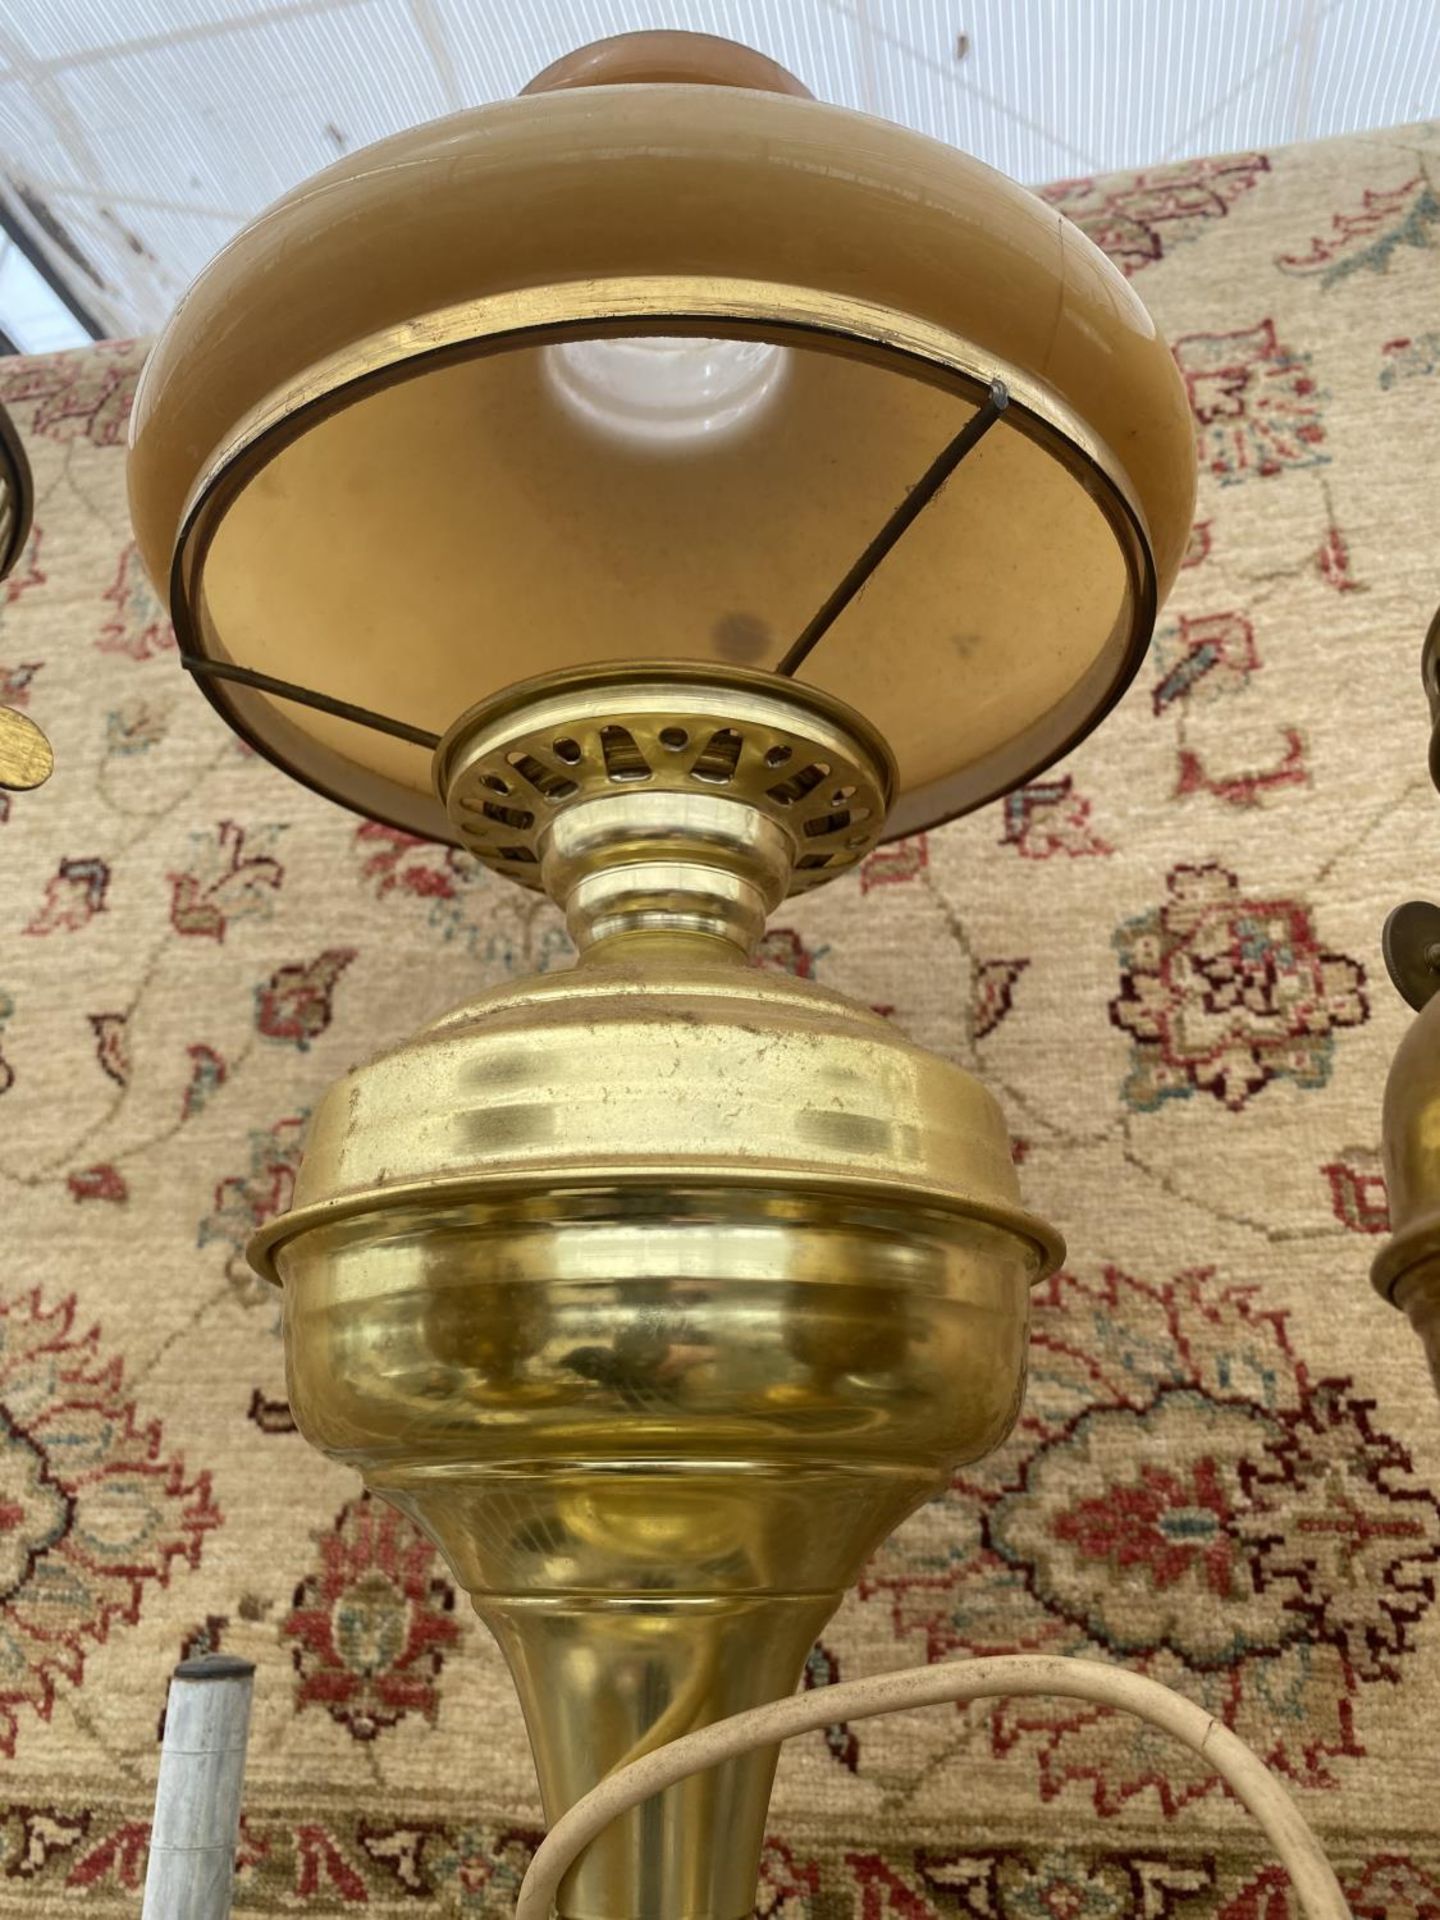 THREE VINTAGE BRASS OIL LAMPS TO INCLUDE ONE CONVERTED TO ELECTRIC WITH A GLASS SHADE - Image 3 of 3